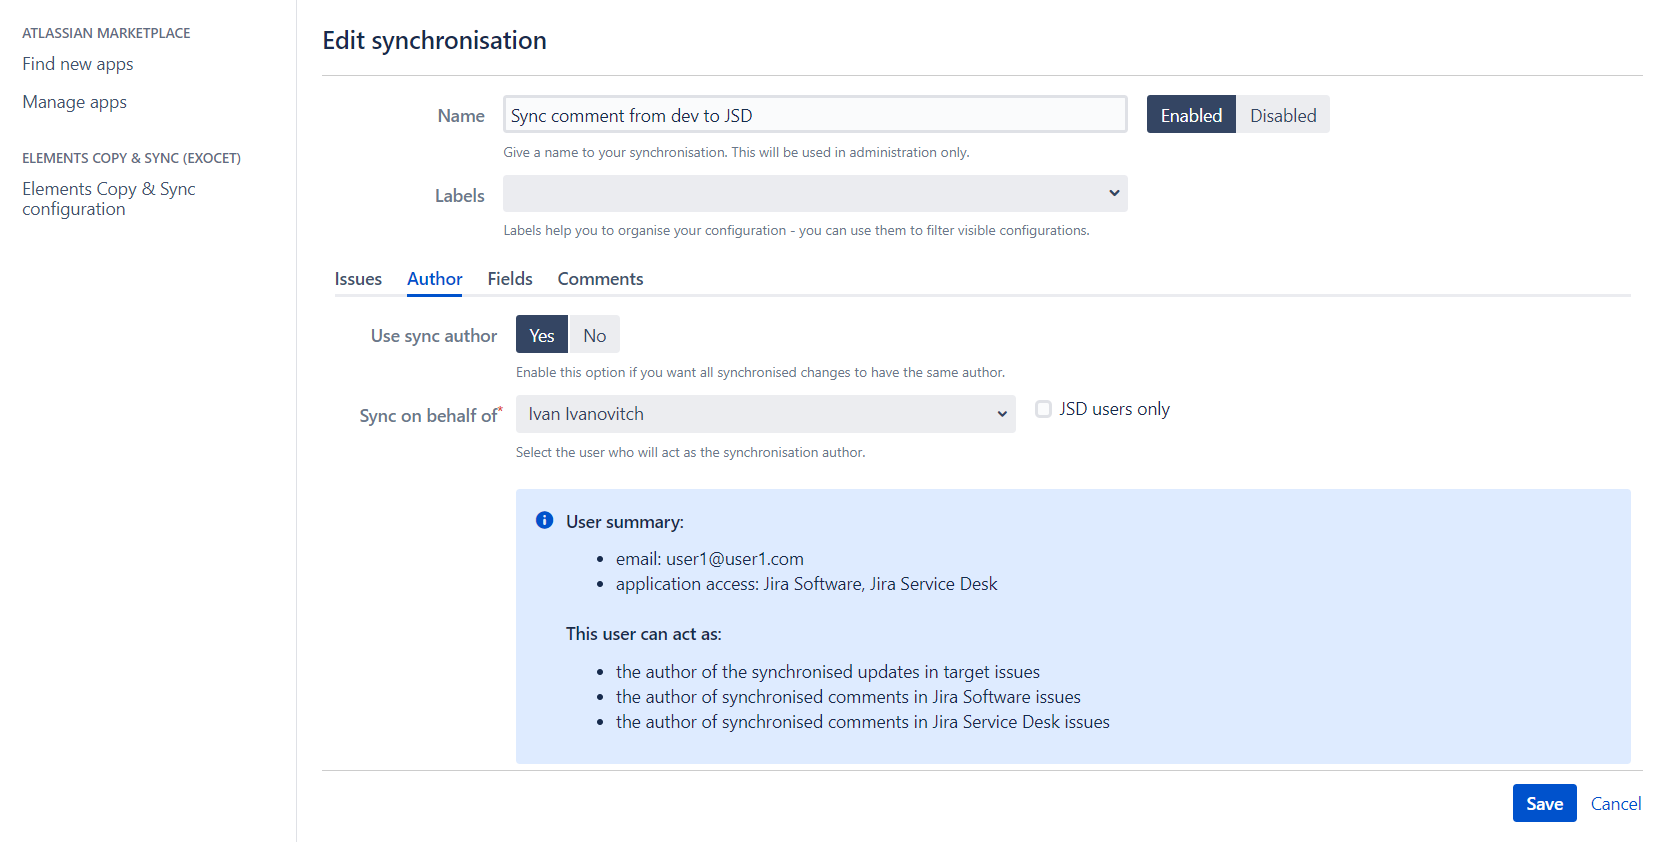 Synchronize comments from Jira to JSD